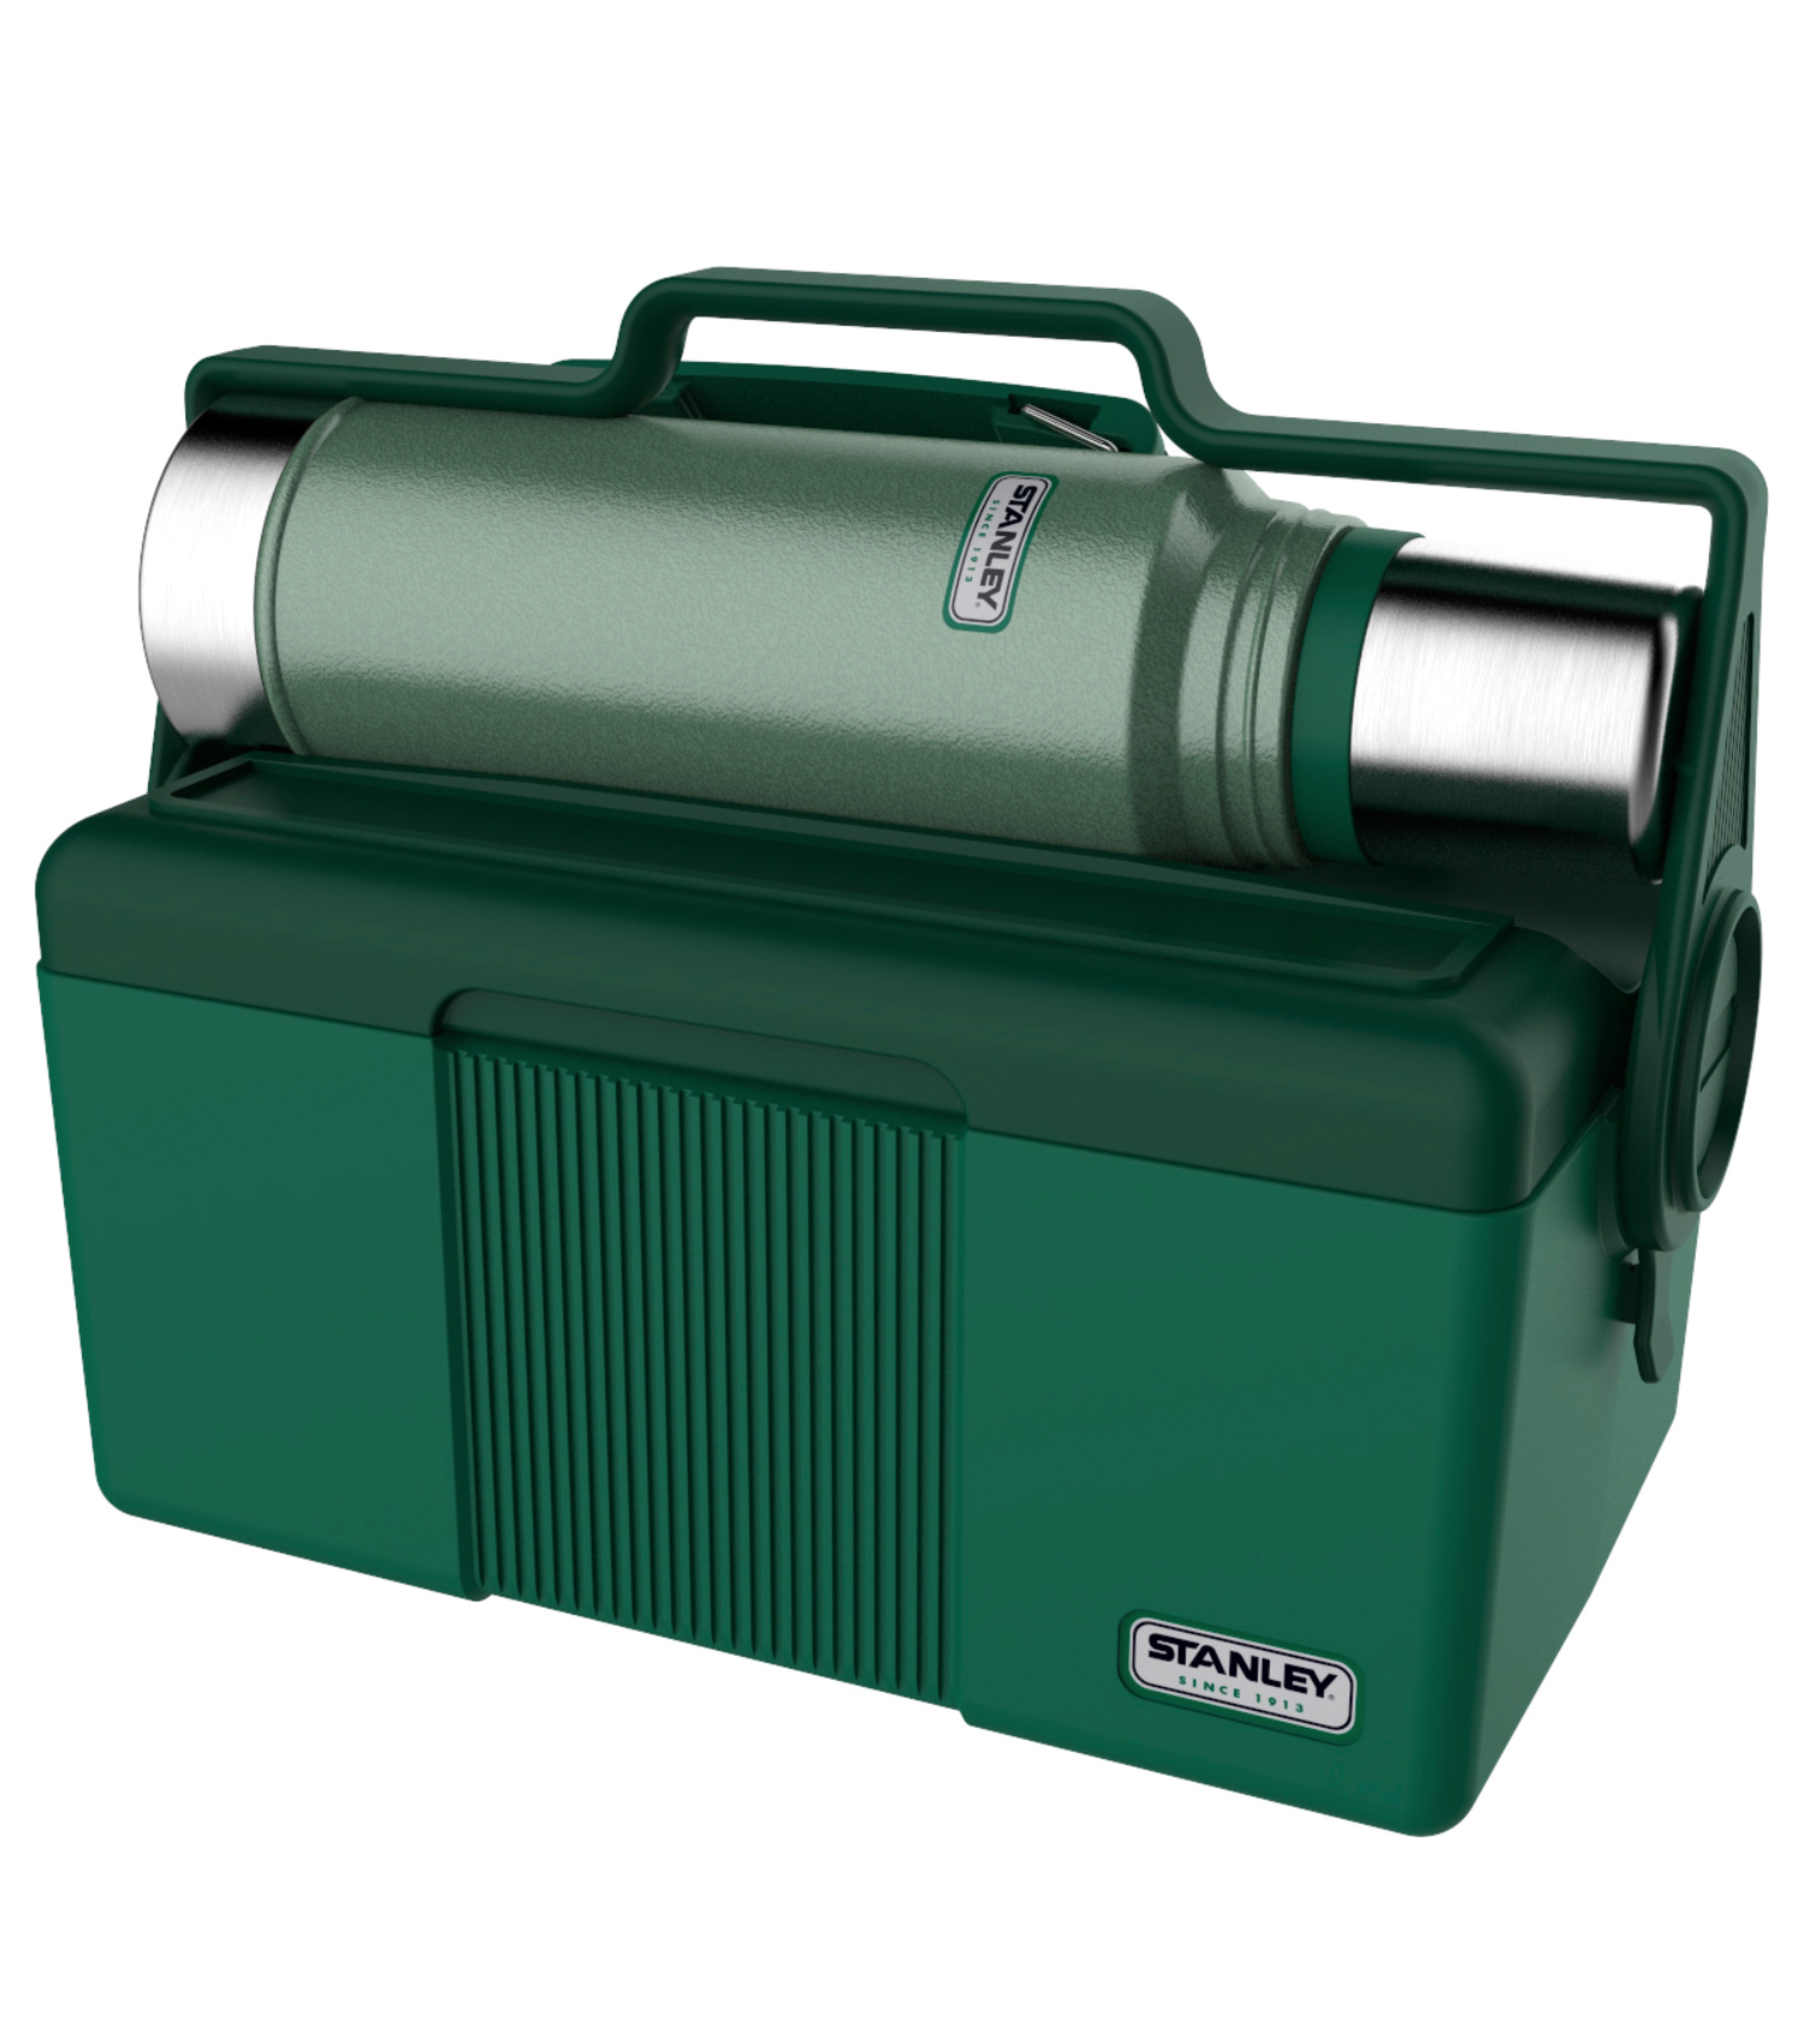 Stanley Heritage 6 6 Litre Cooler And 1 Litre Flask Bottle Combo Green By Stanley 568